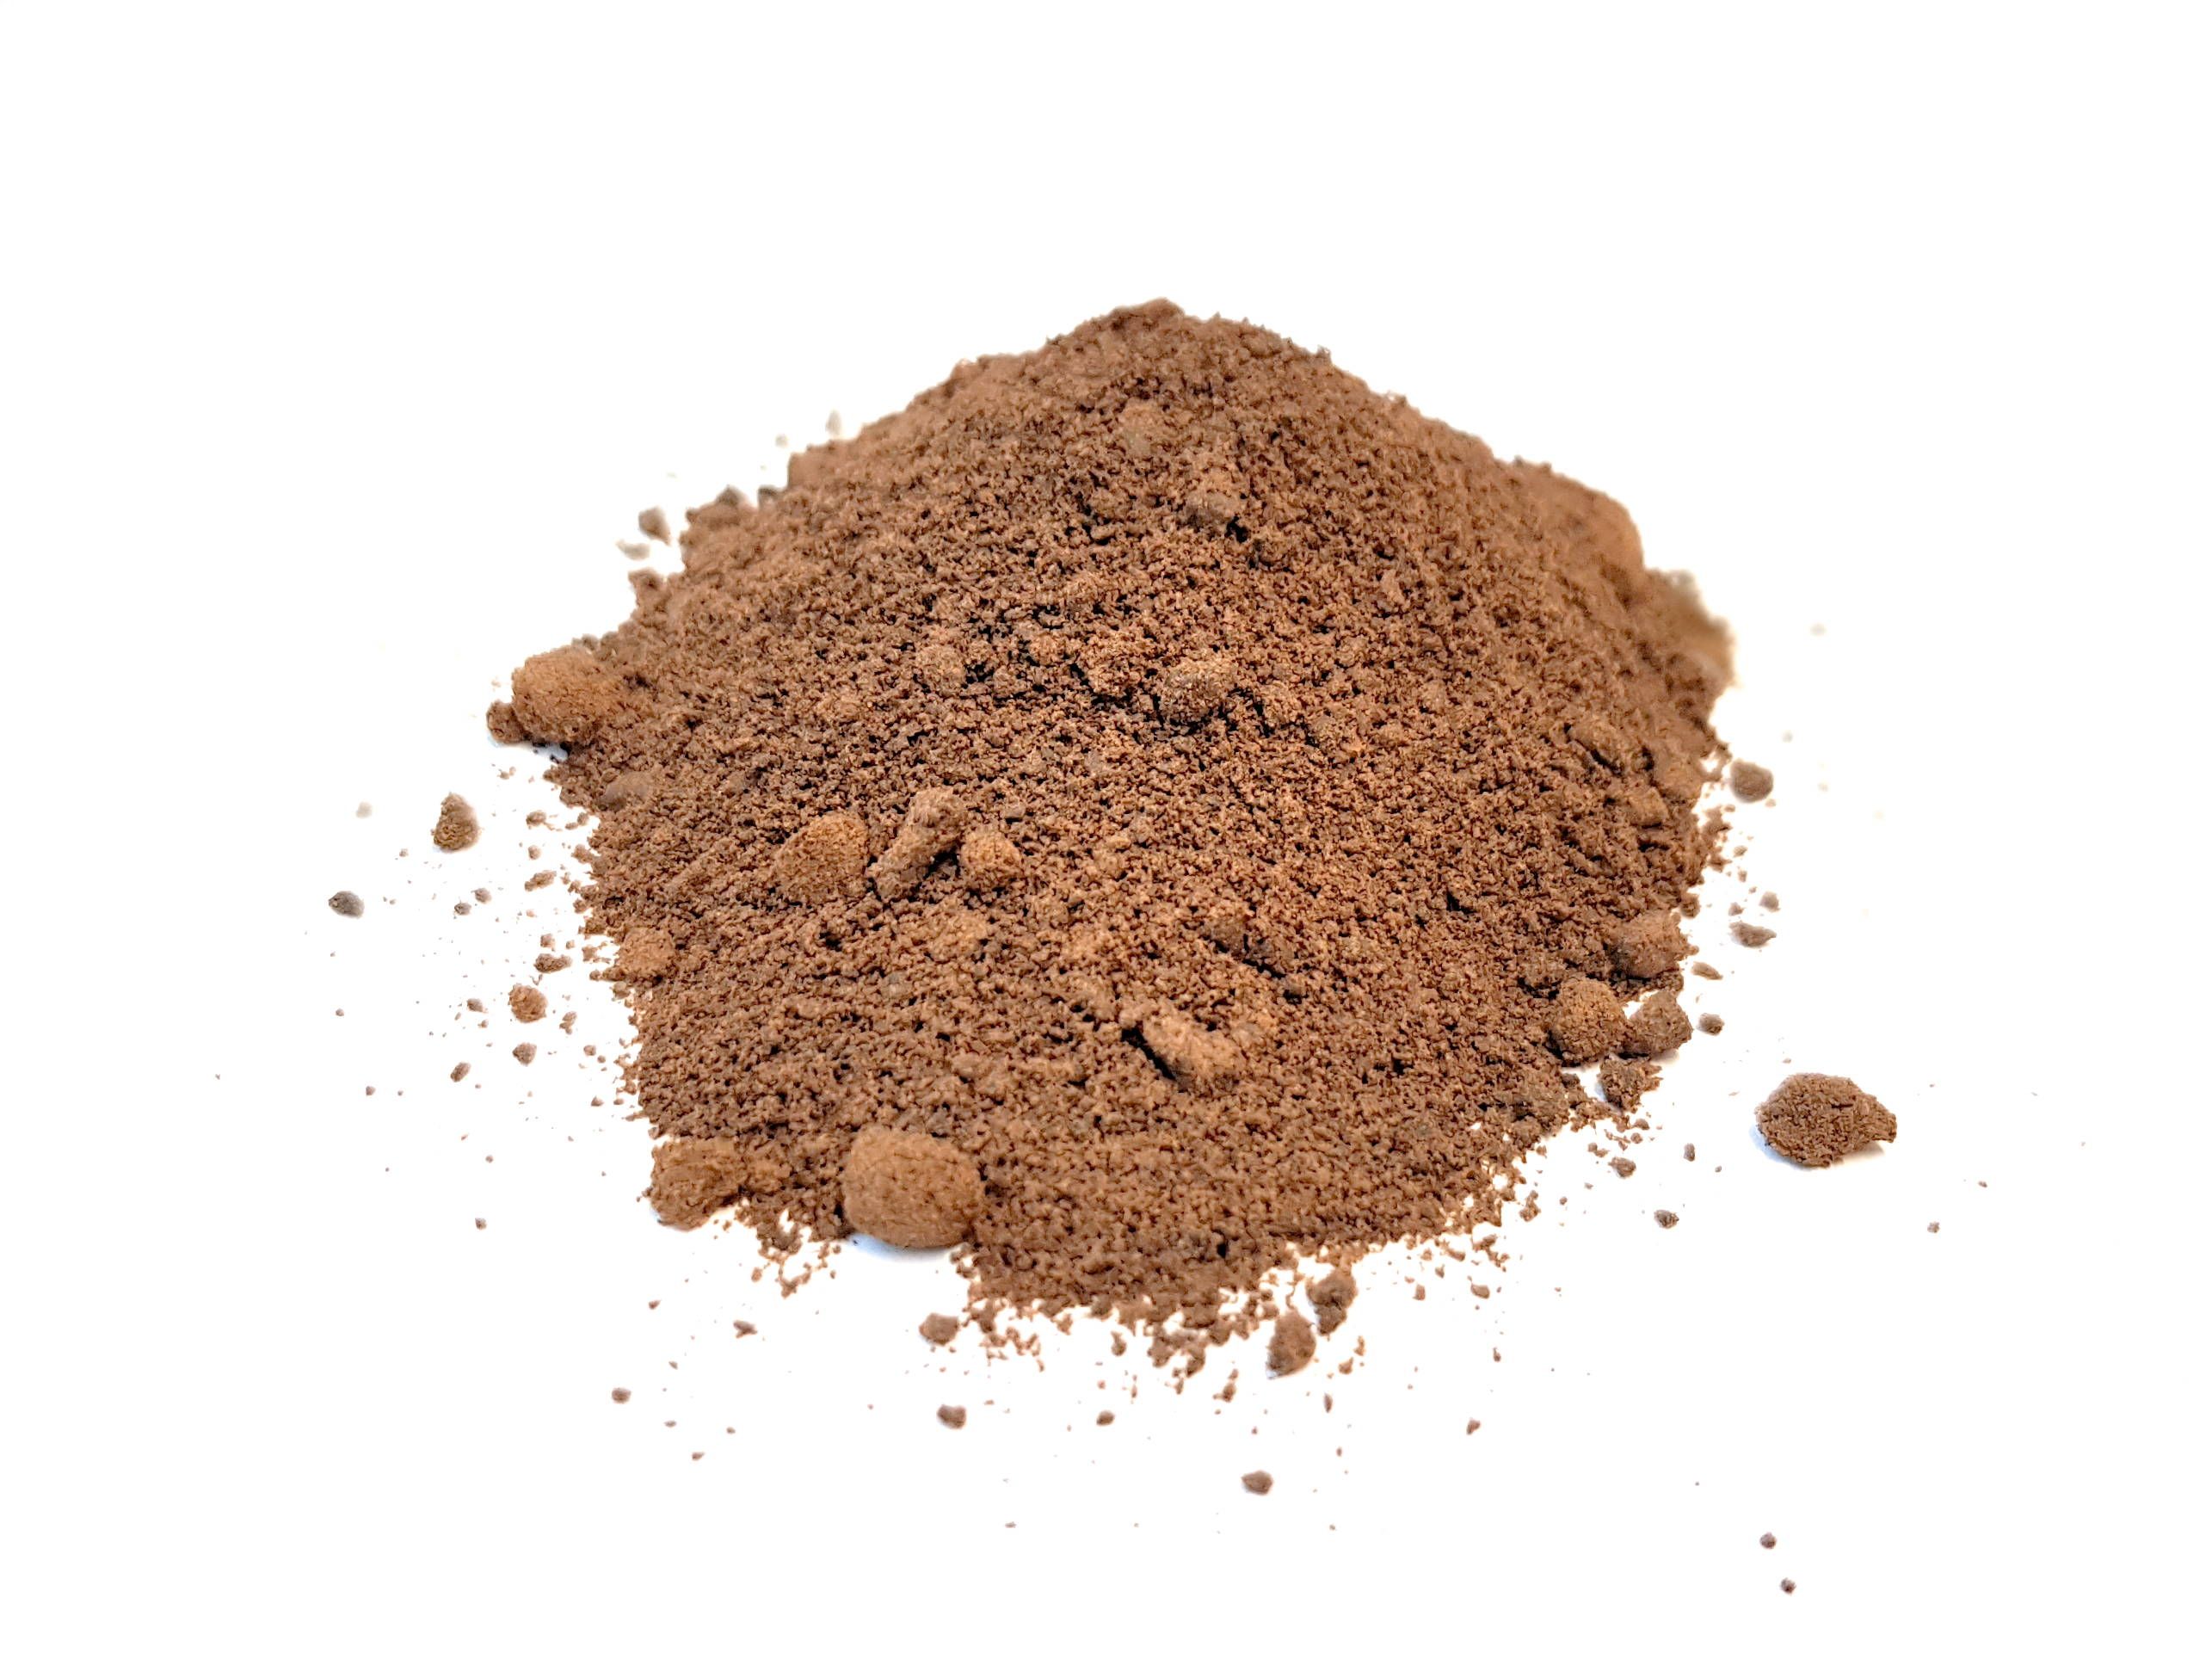 A pile of brown soil on a white background